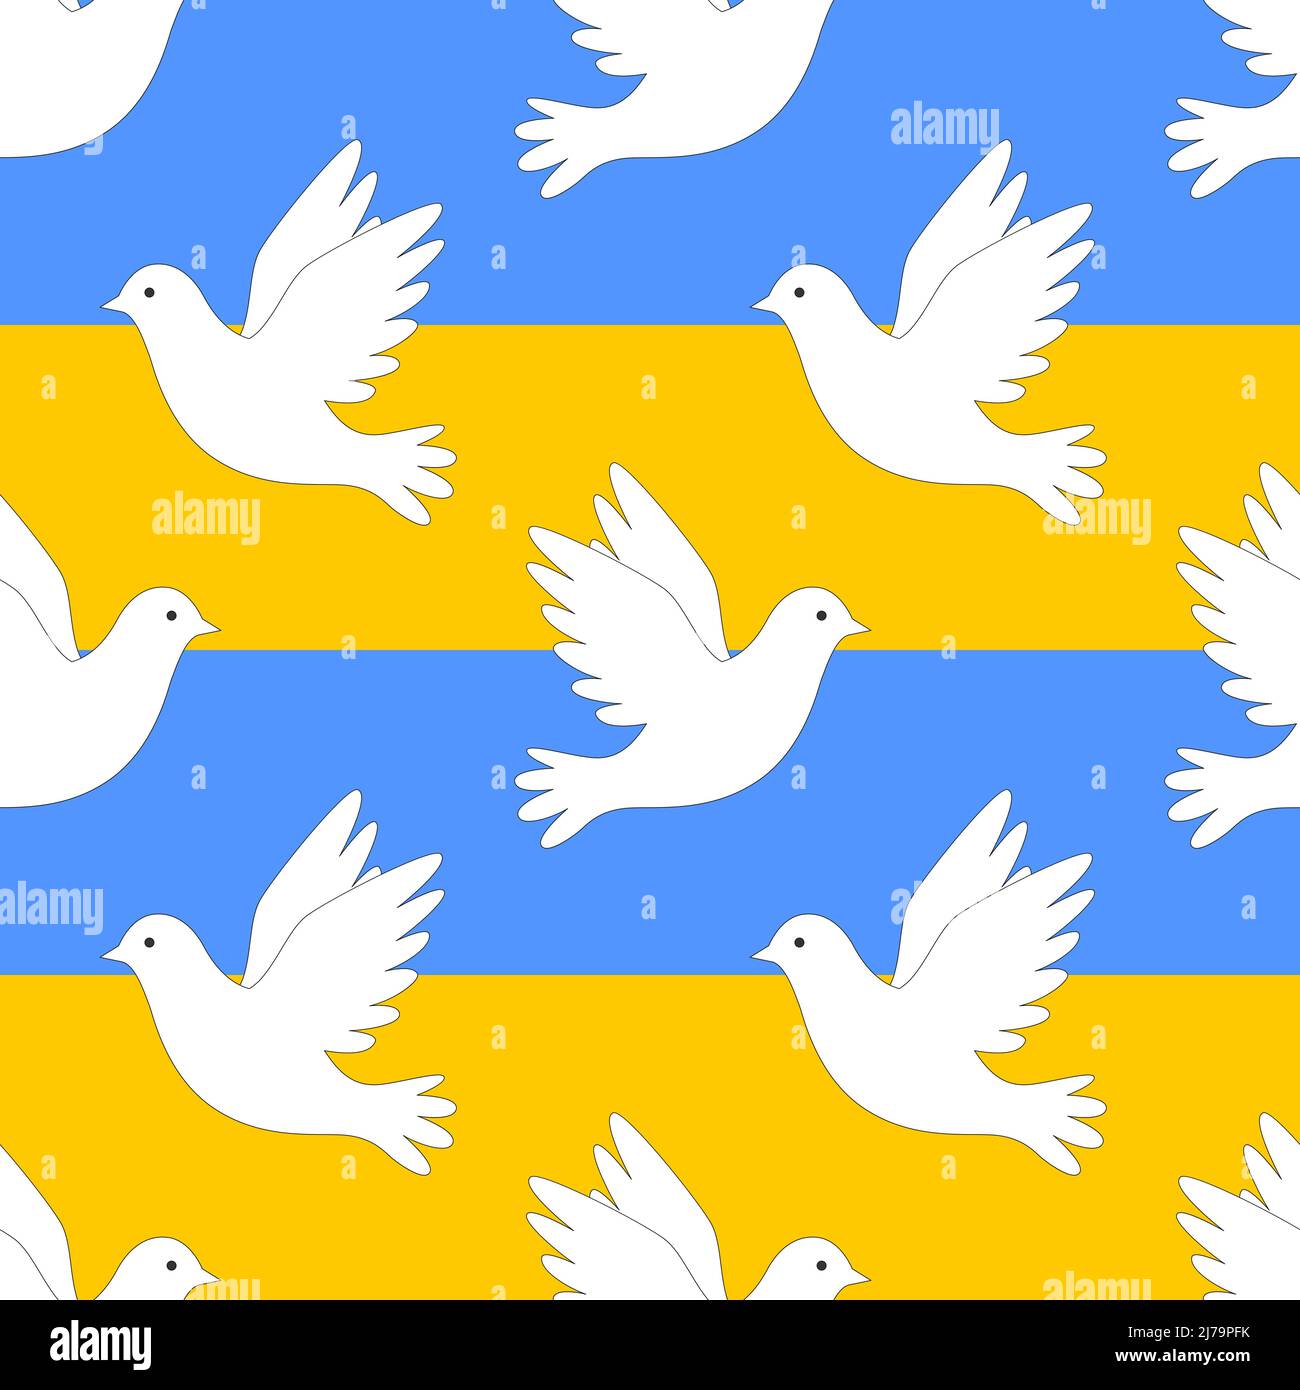 Seamless pattern with blue, birds, a symbol of peace. Elements with an outline on a blue-yellow background. Great for textiles, packaging paper. Color Stock Vector